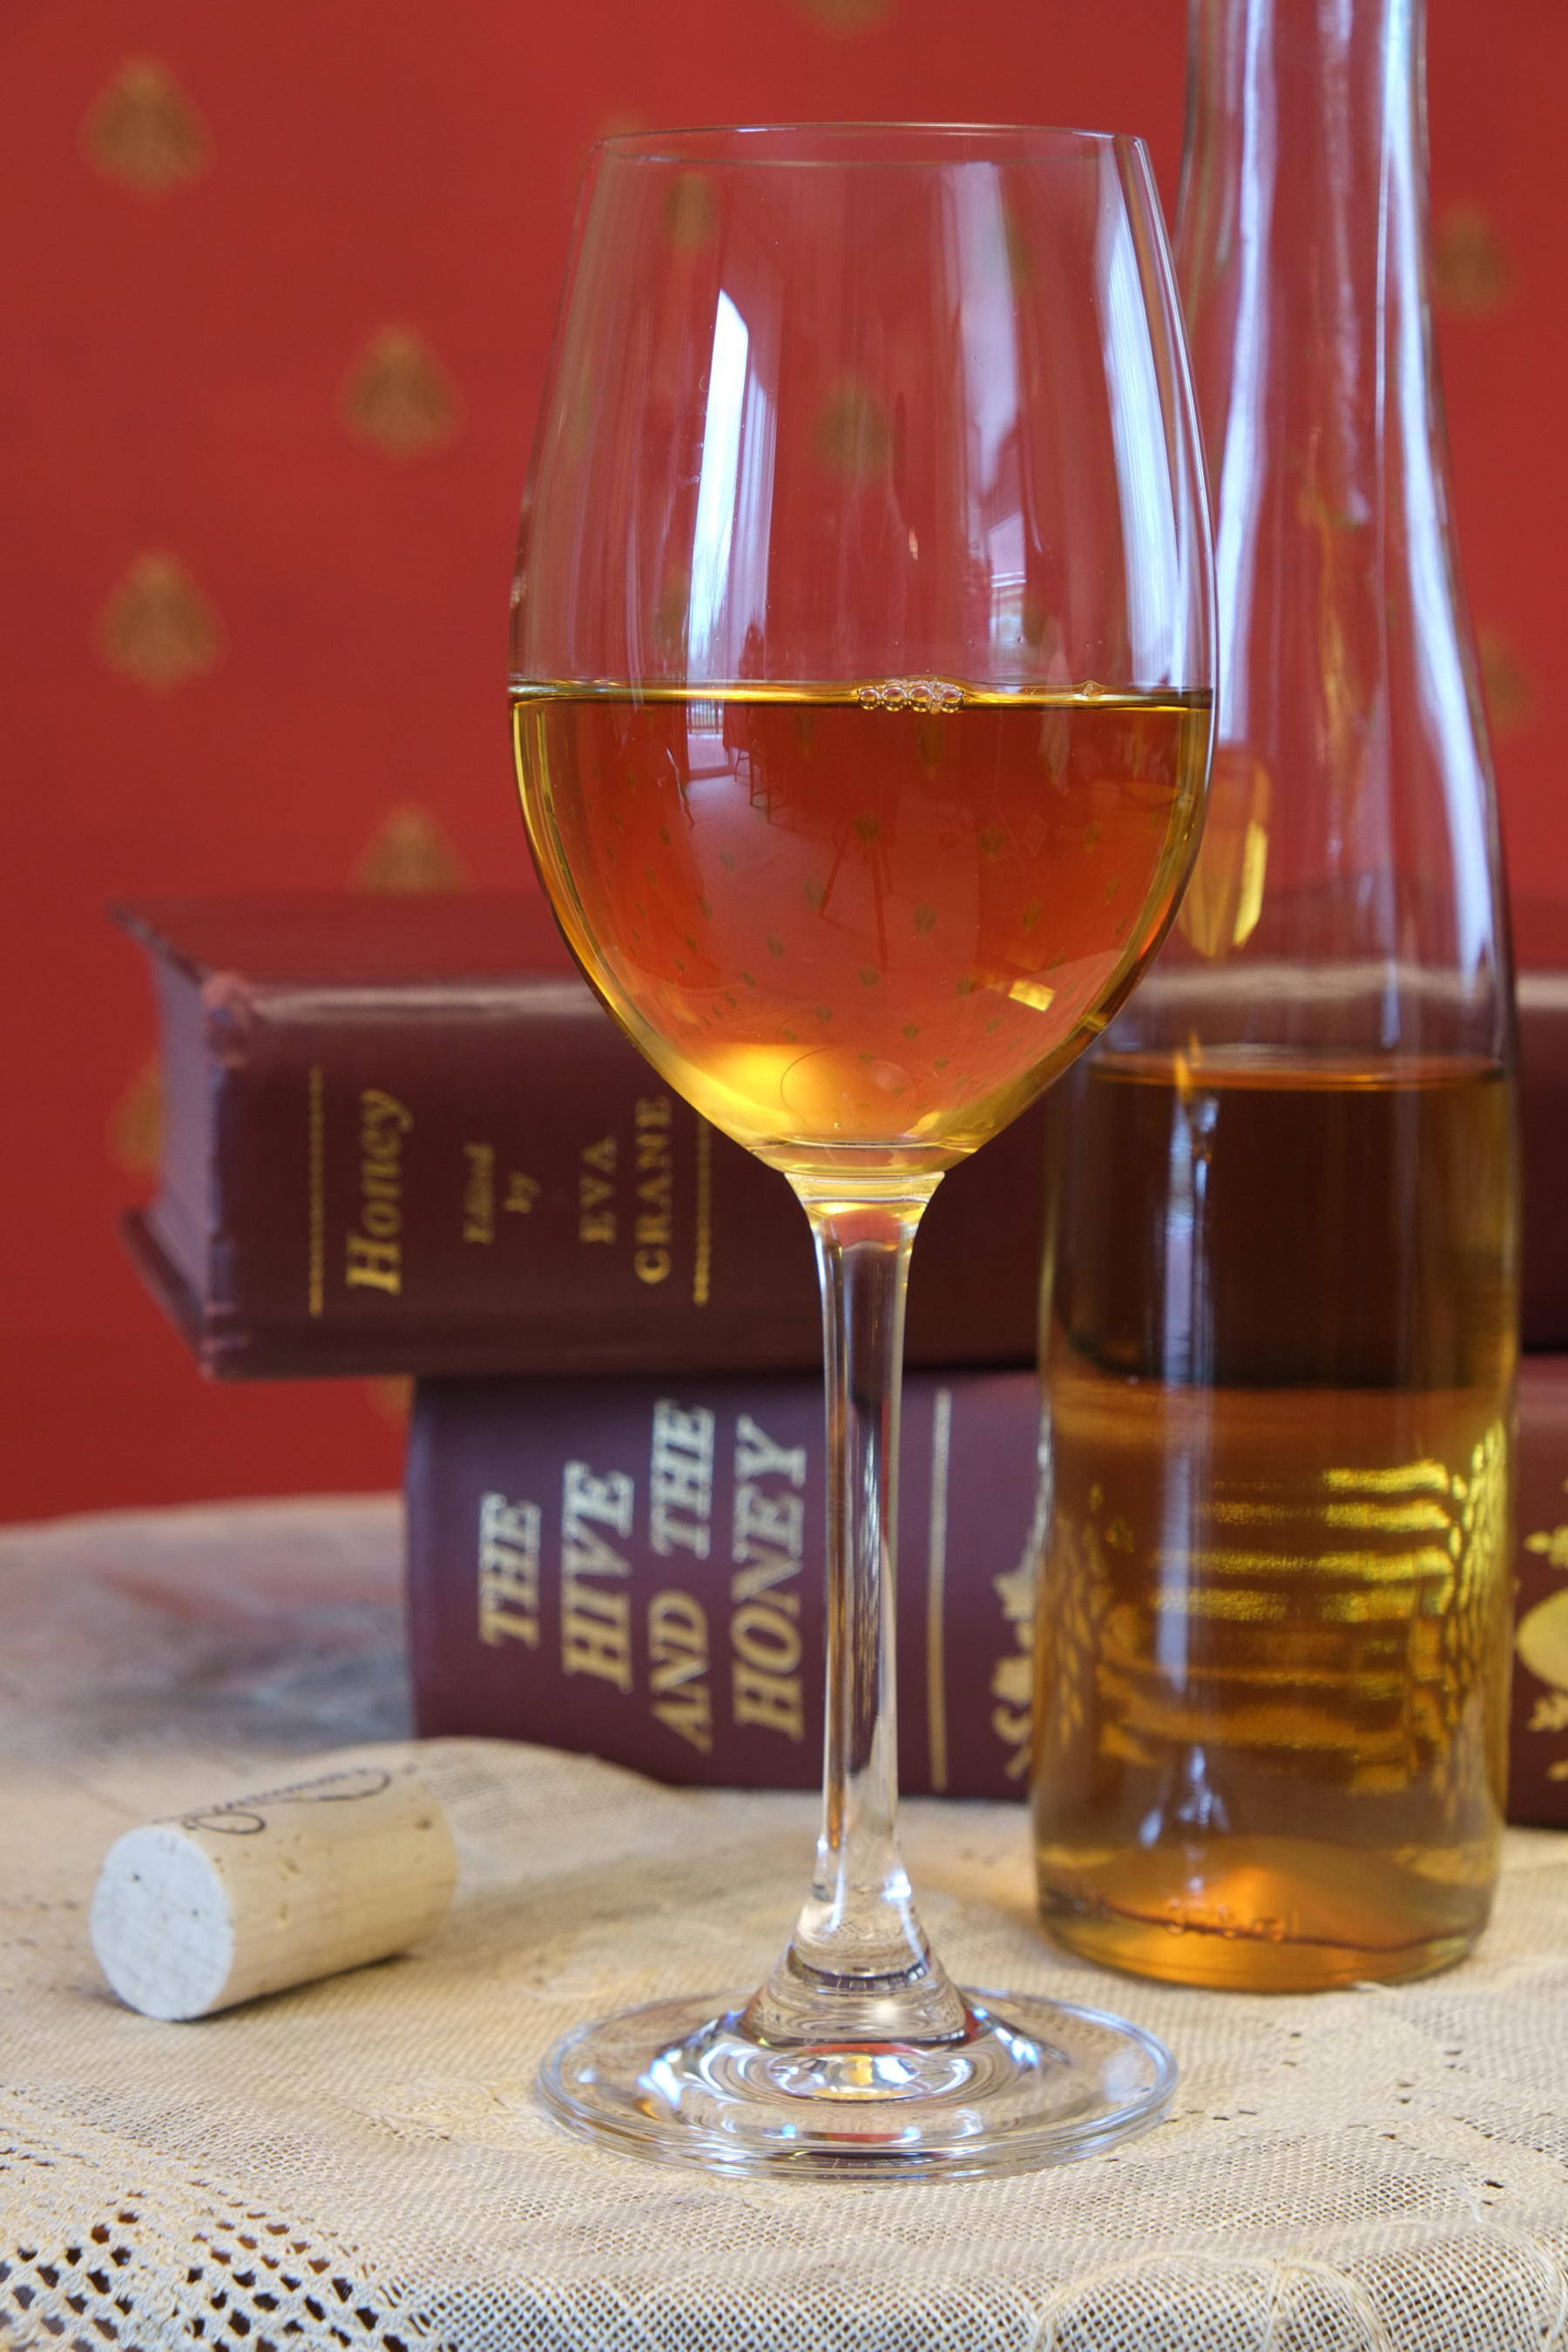 Mead. The fermented beverage made from honey. (PRNewsFoto/American Mead Makers Association)